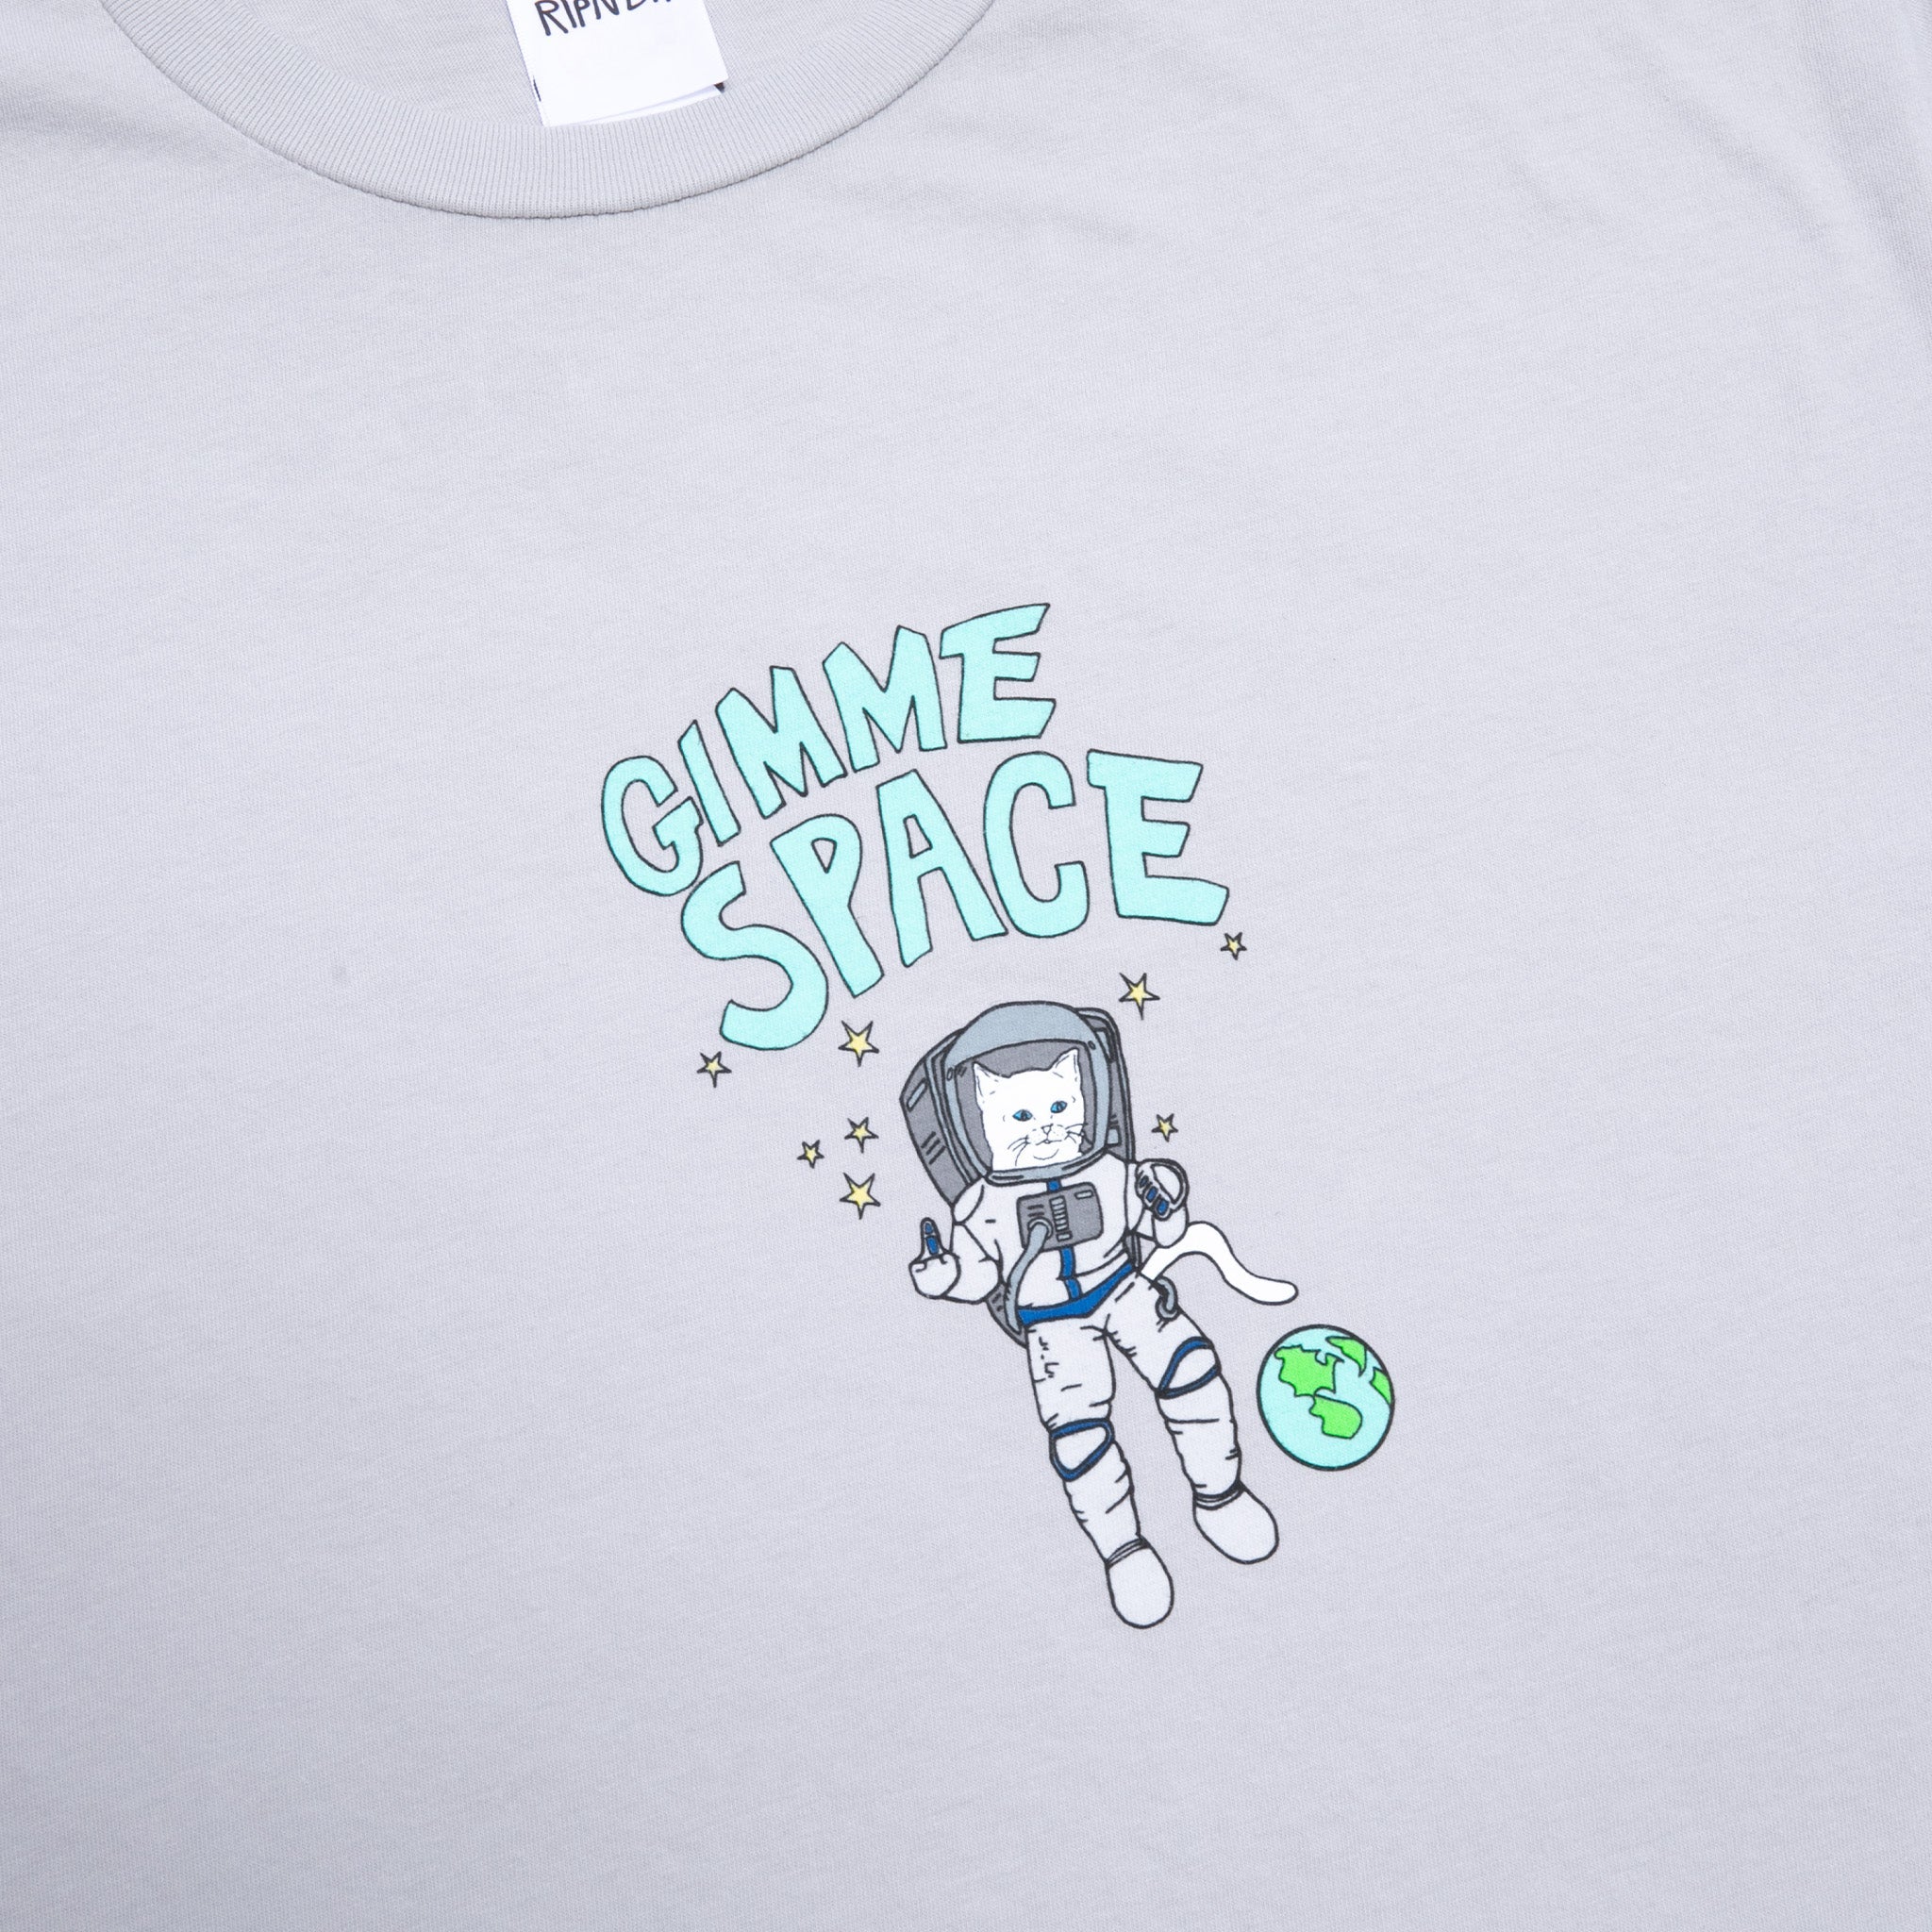 Gimme Space Tee (Grey)